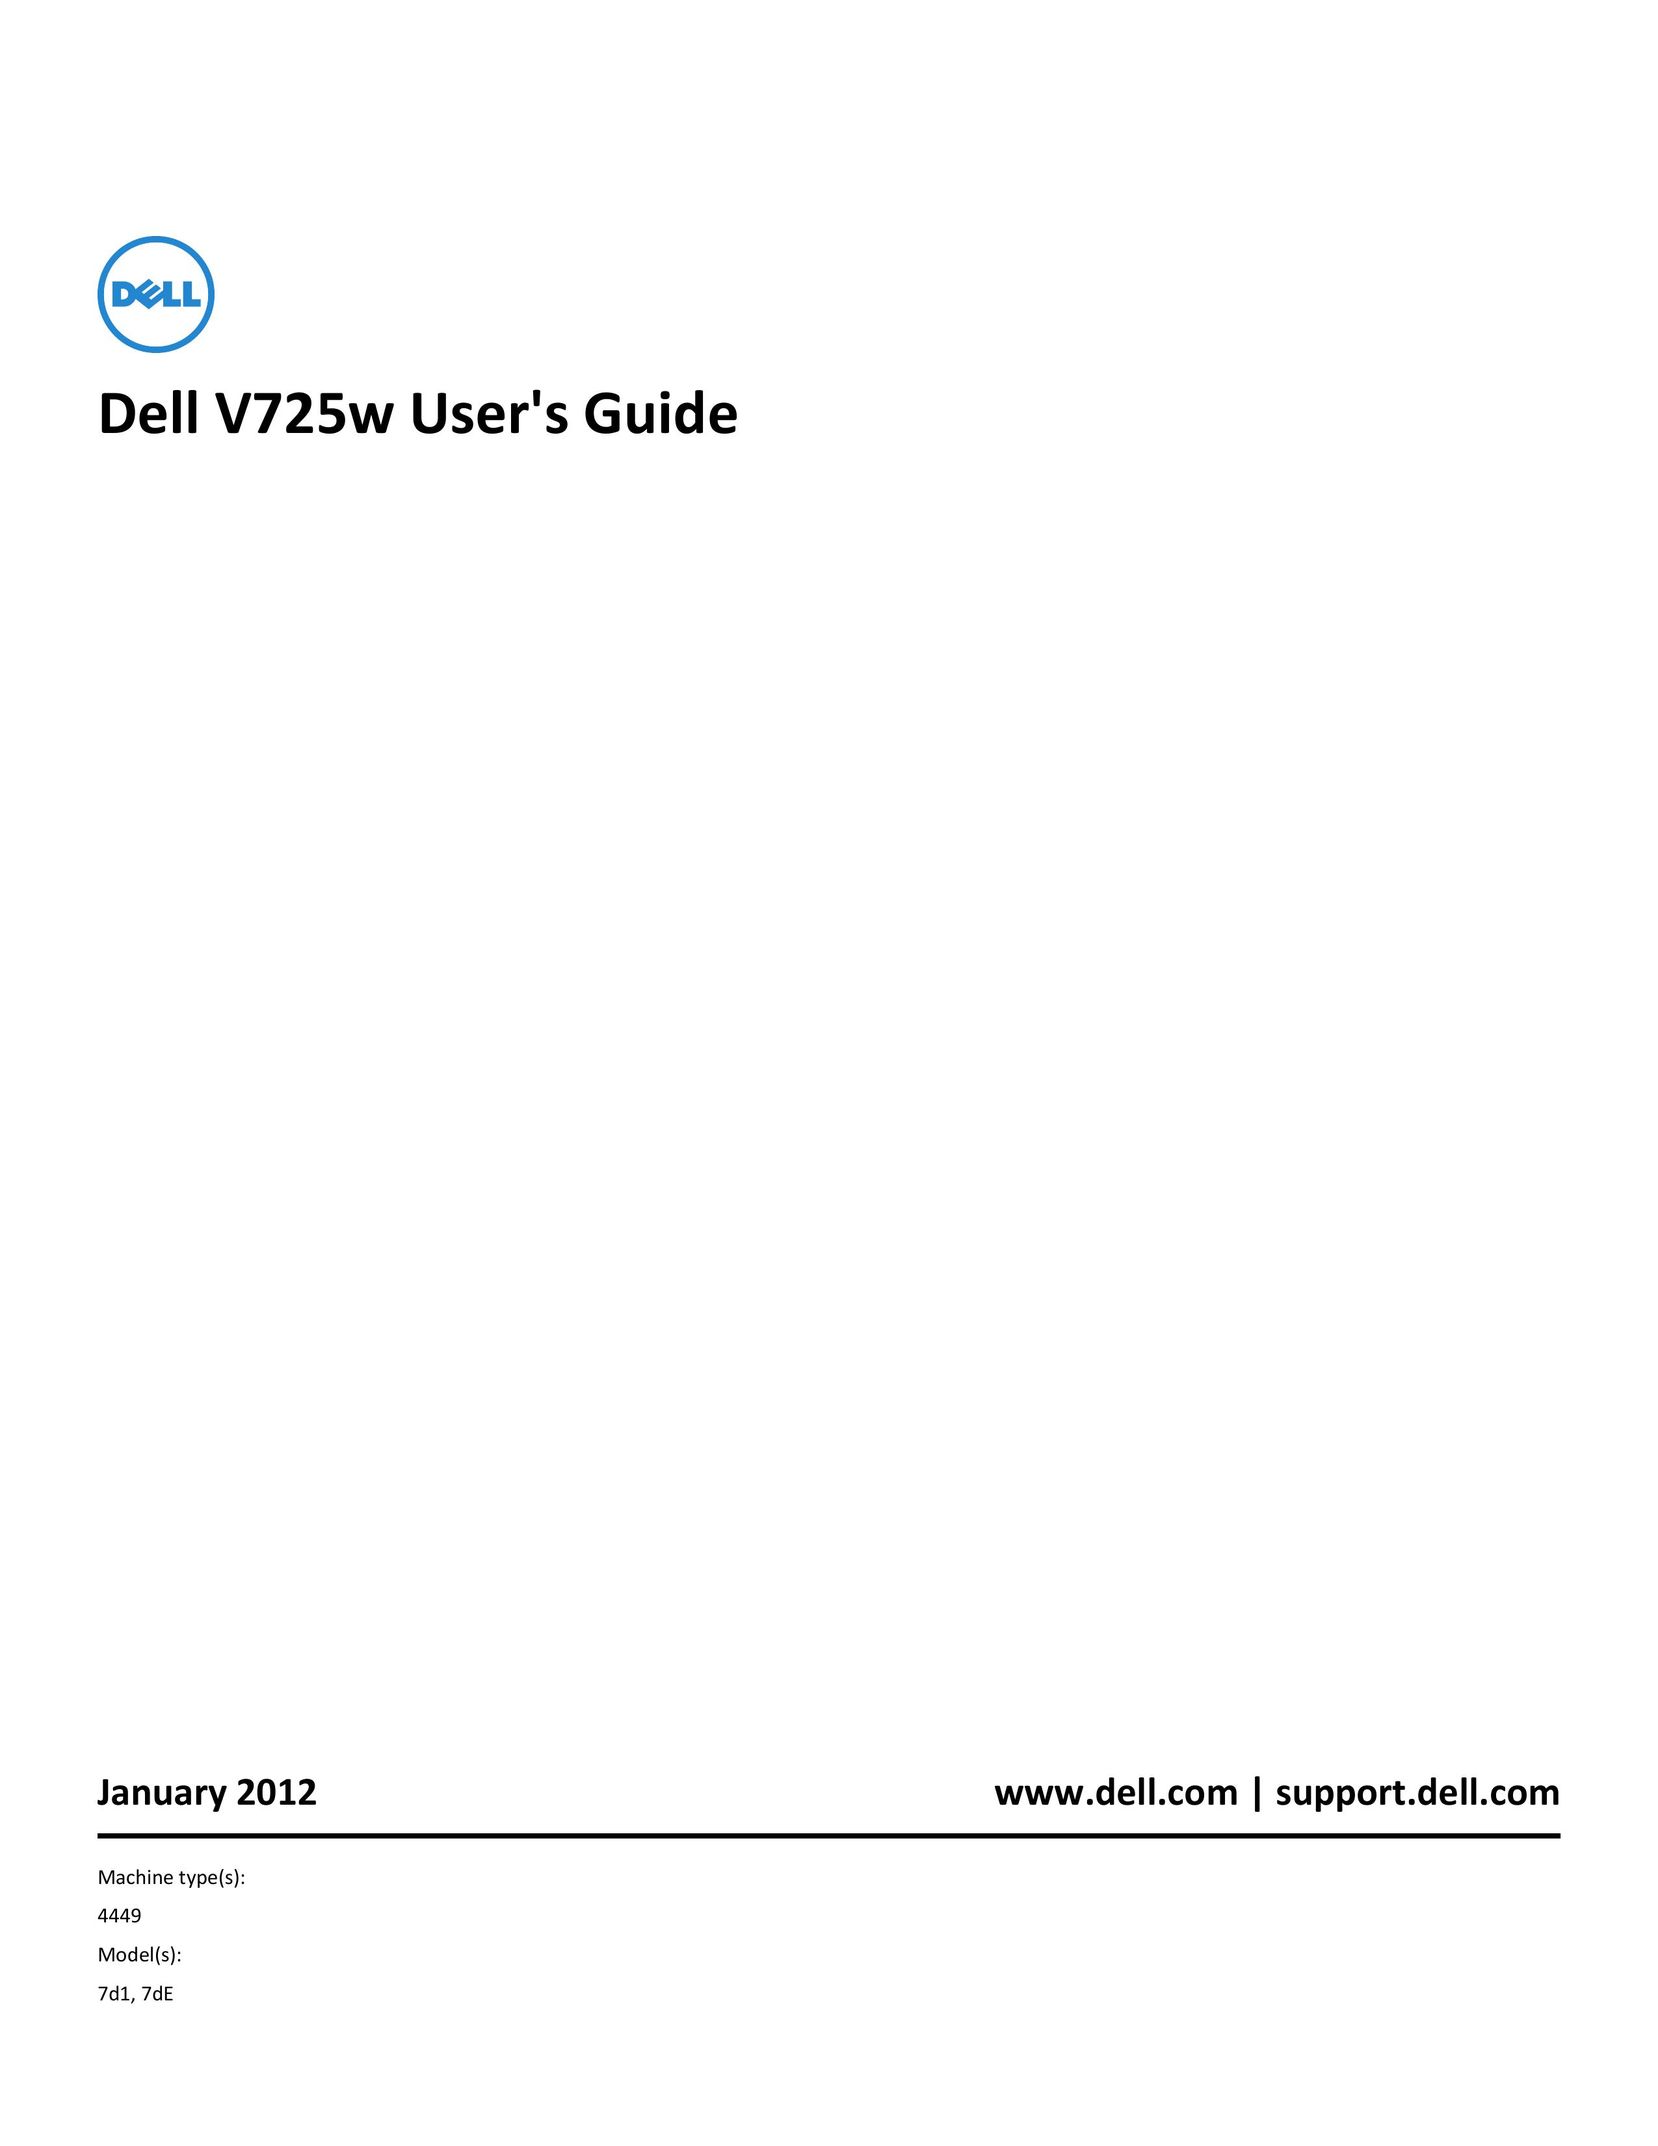 Dell 7d1 All in One Printer User Manual